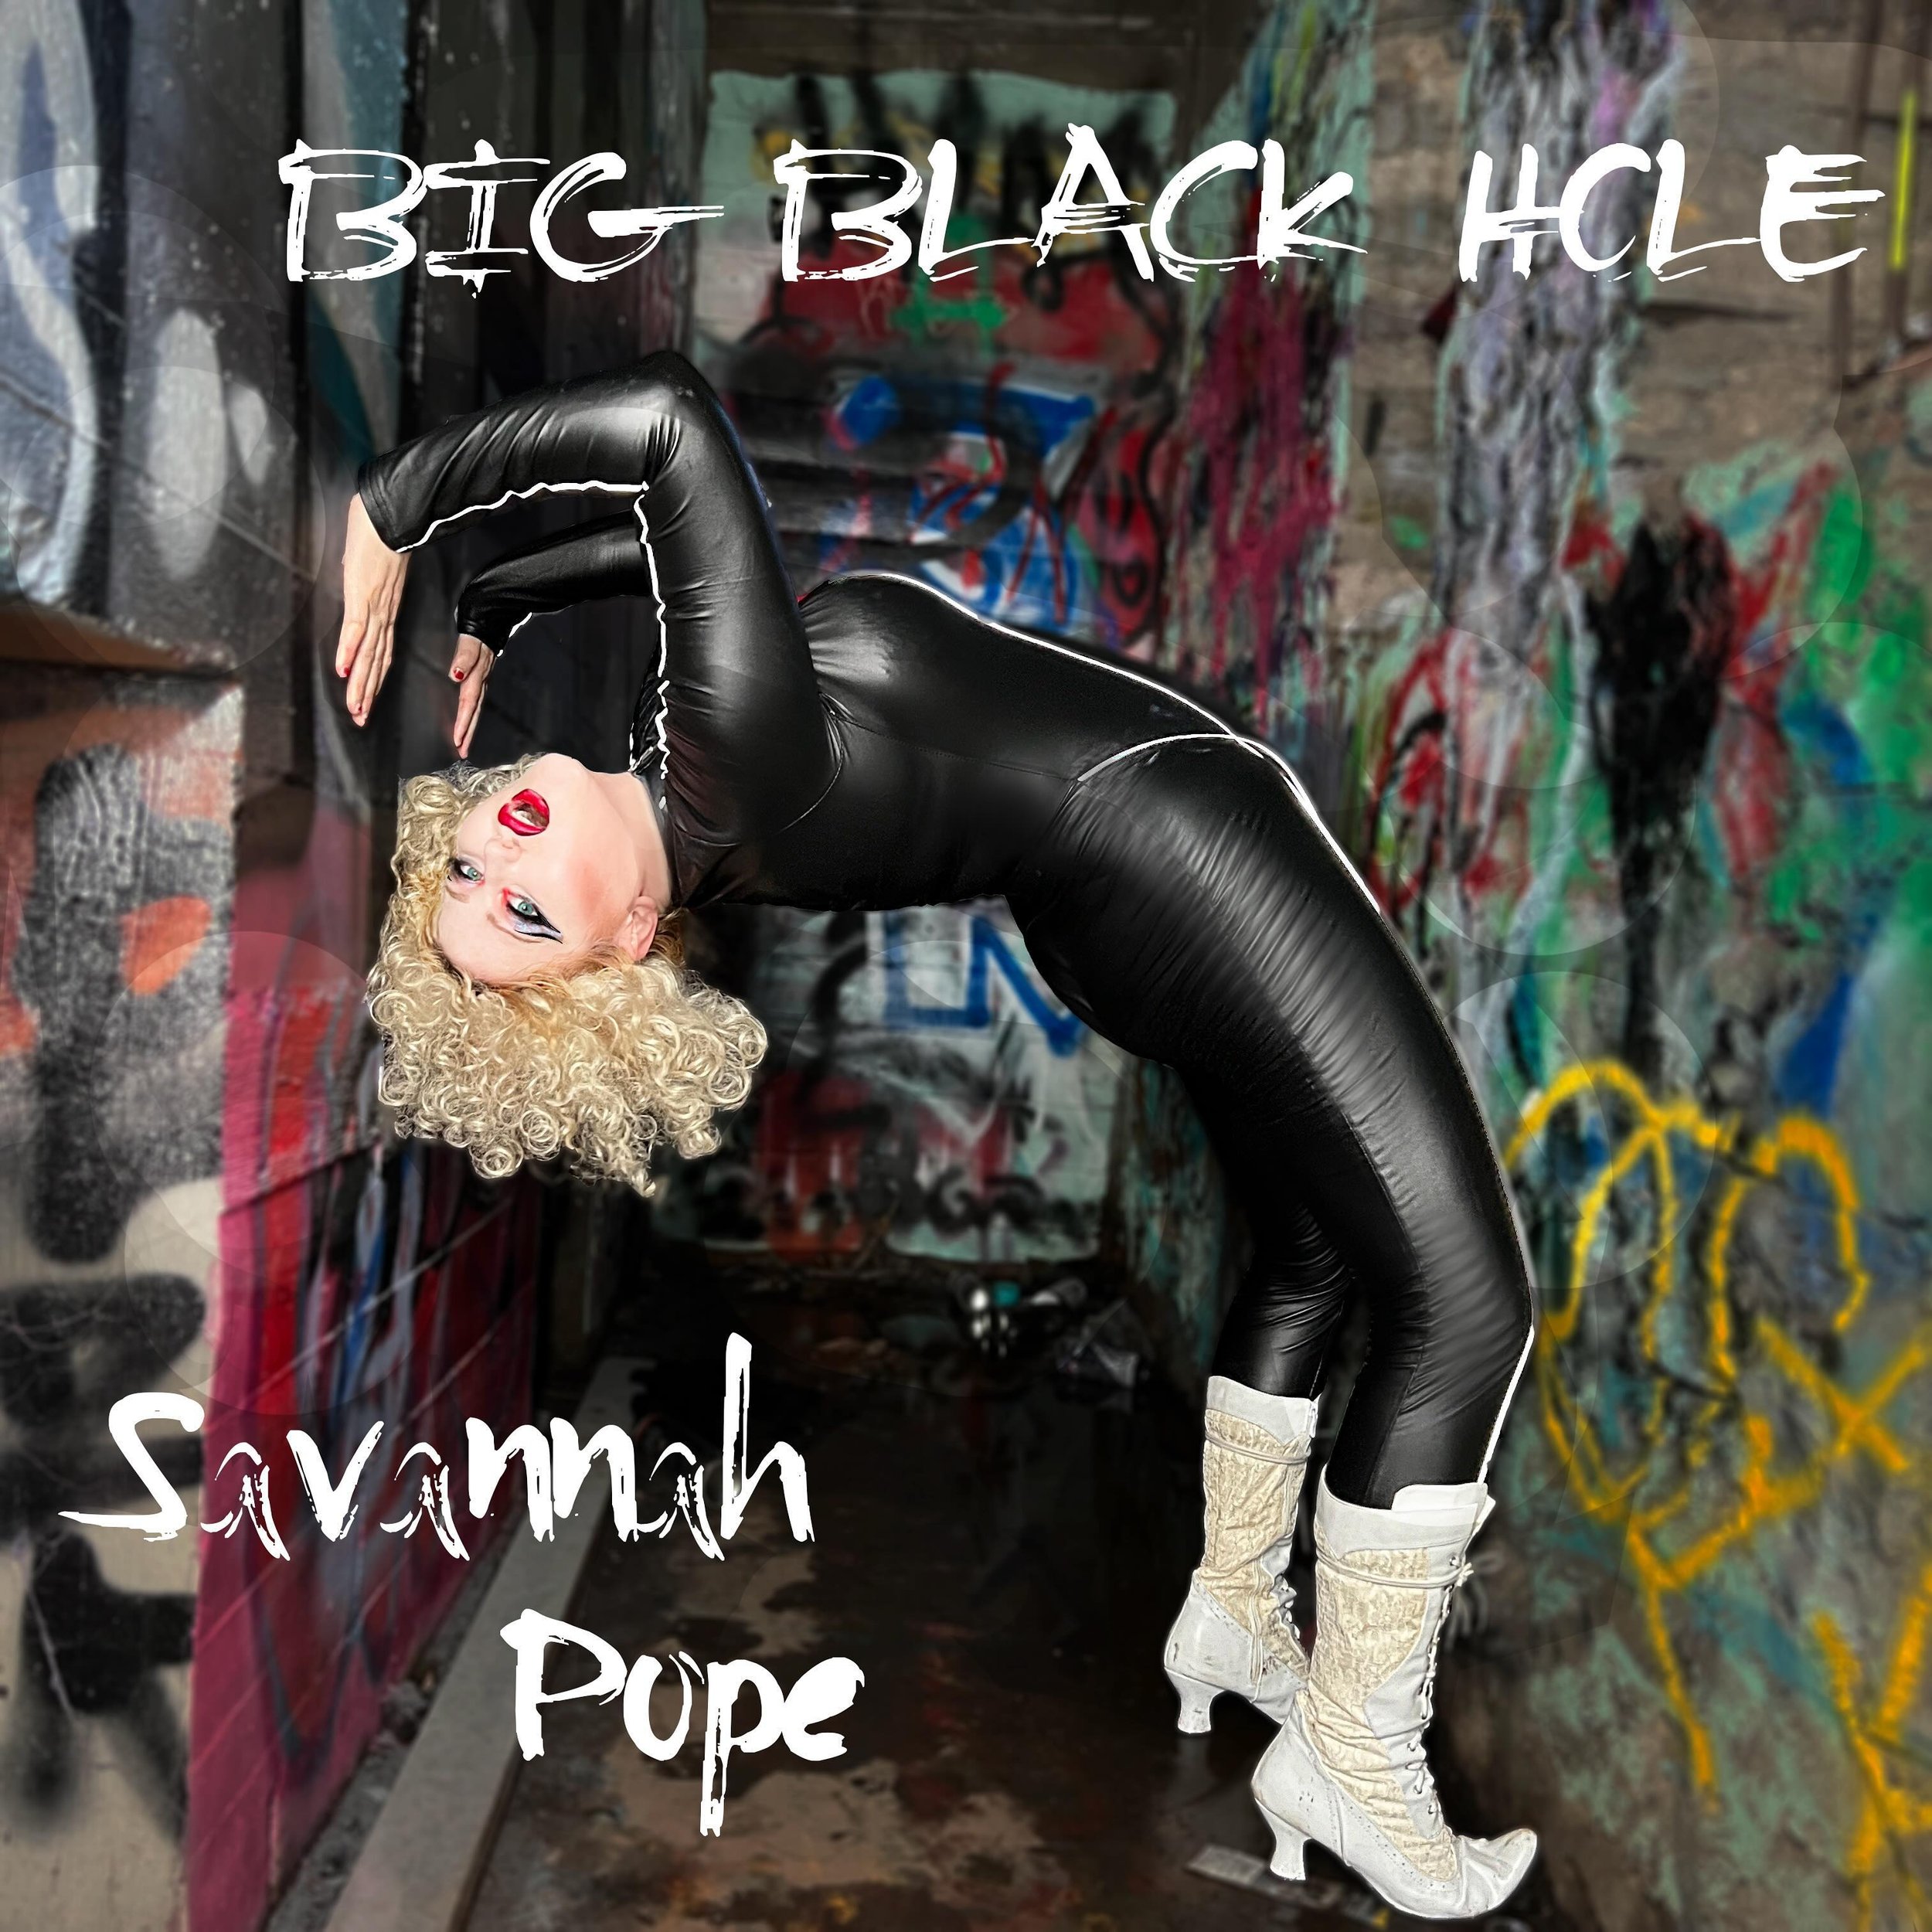 It&rsquo;s coming!!! The next single from Pandemonium is &ldquo;Big Black Hole&rdquo;. Presave link in bio. Exclusive release show @themintla 5/10 w @derekdaymusic - link also in bio. Presave and grab ur tix now 🖤